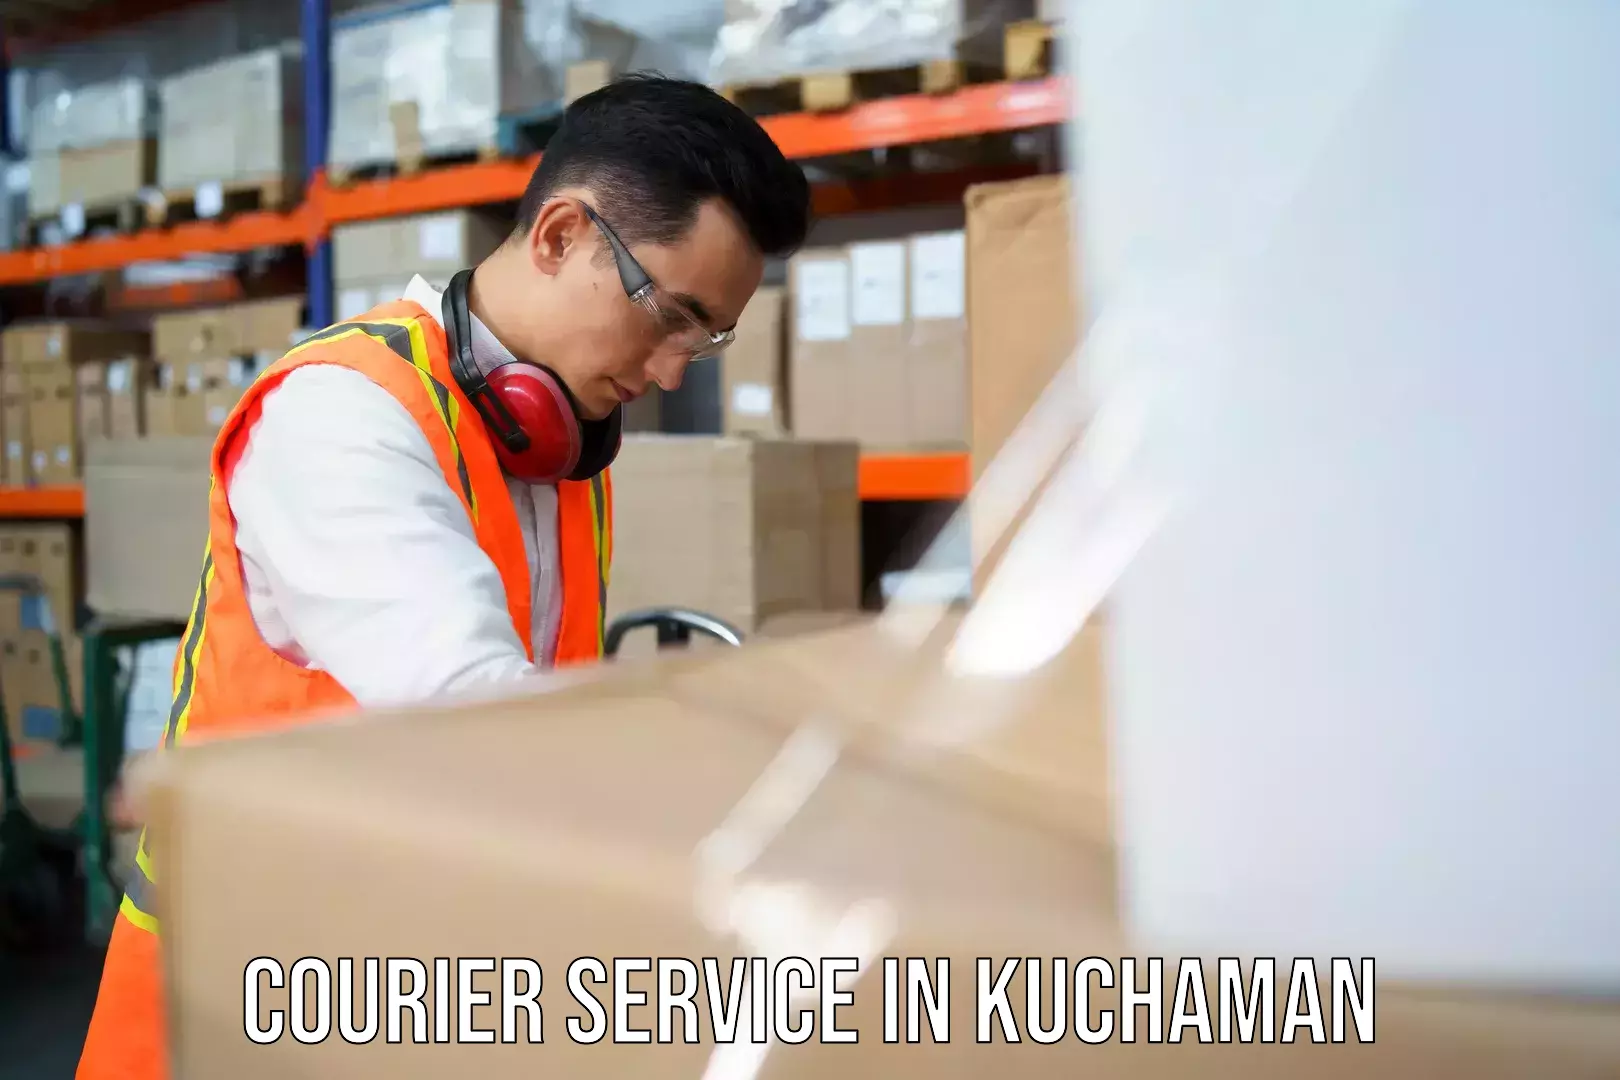 Courier service partnerships in Kuchaman